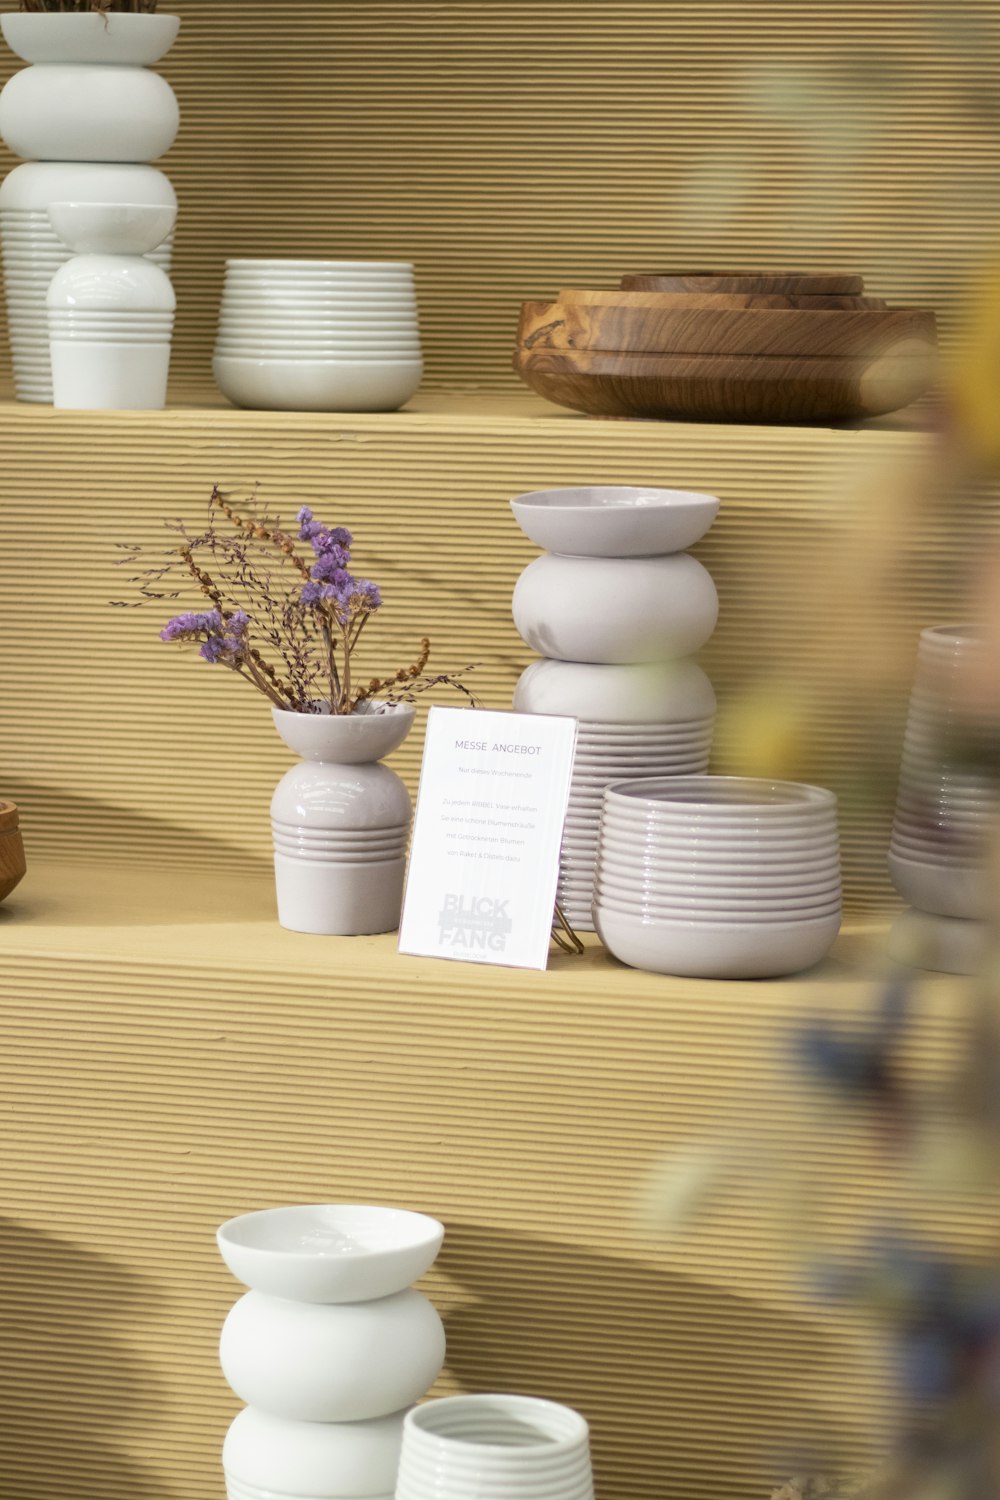 a display of white dishes and vases on shelves